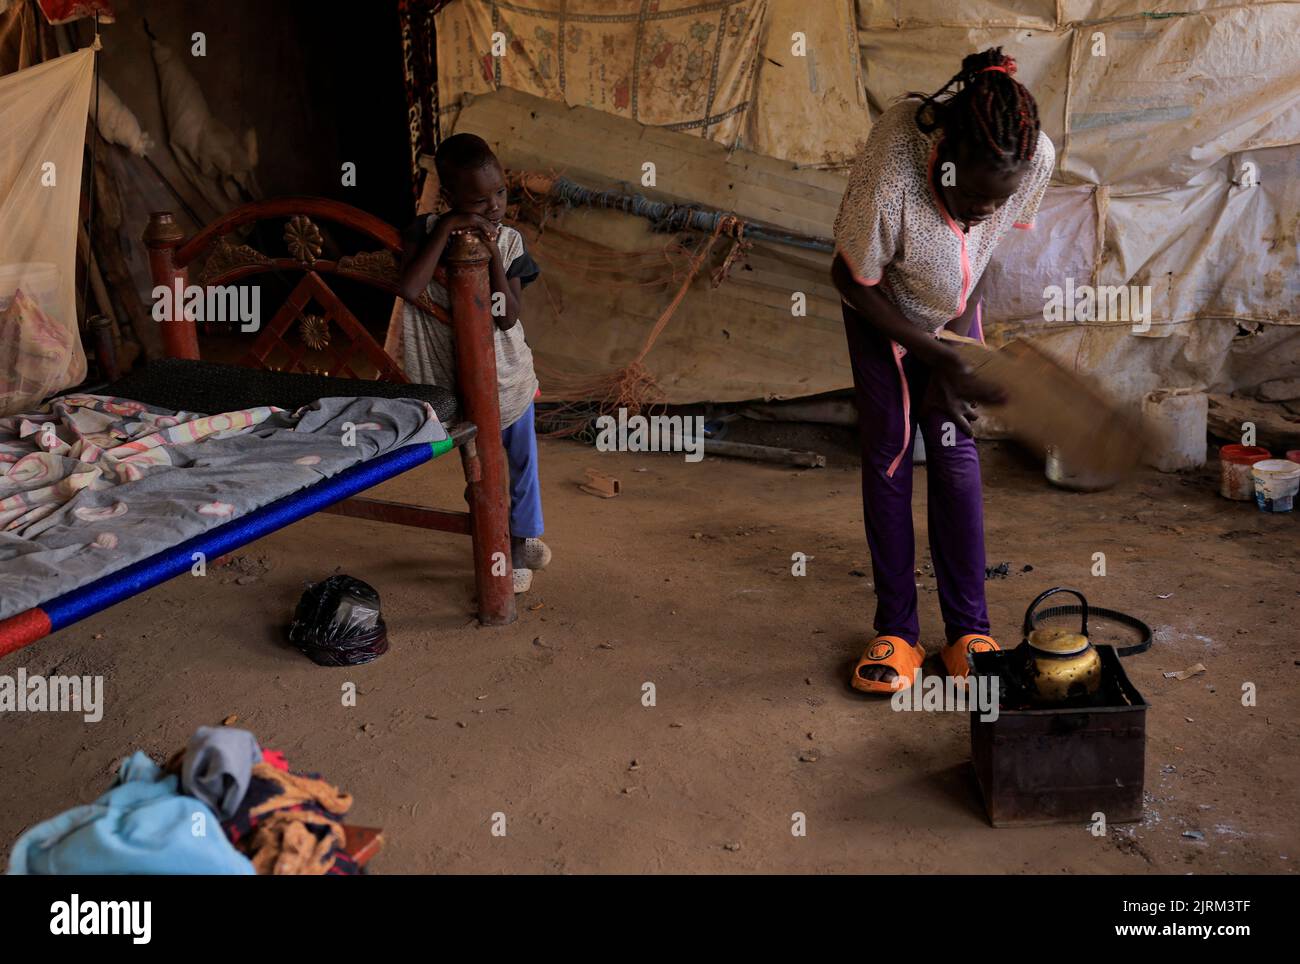 South Sudanese families who returned to Khartoum after the 2011 secession, live in a makeshift shelter in an abandoned plot of land in Bahri, Sudan, August 16, 2022. REUTERS/Mohamed Nureldin Abdallah Stock Photo